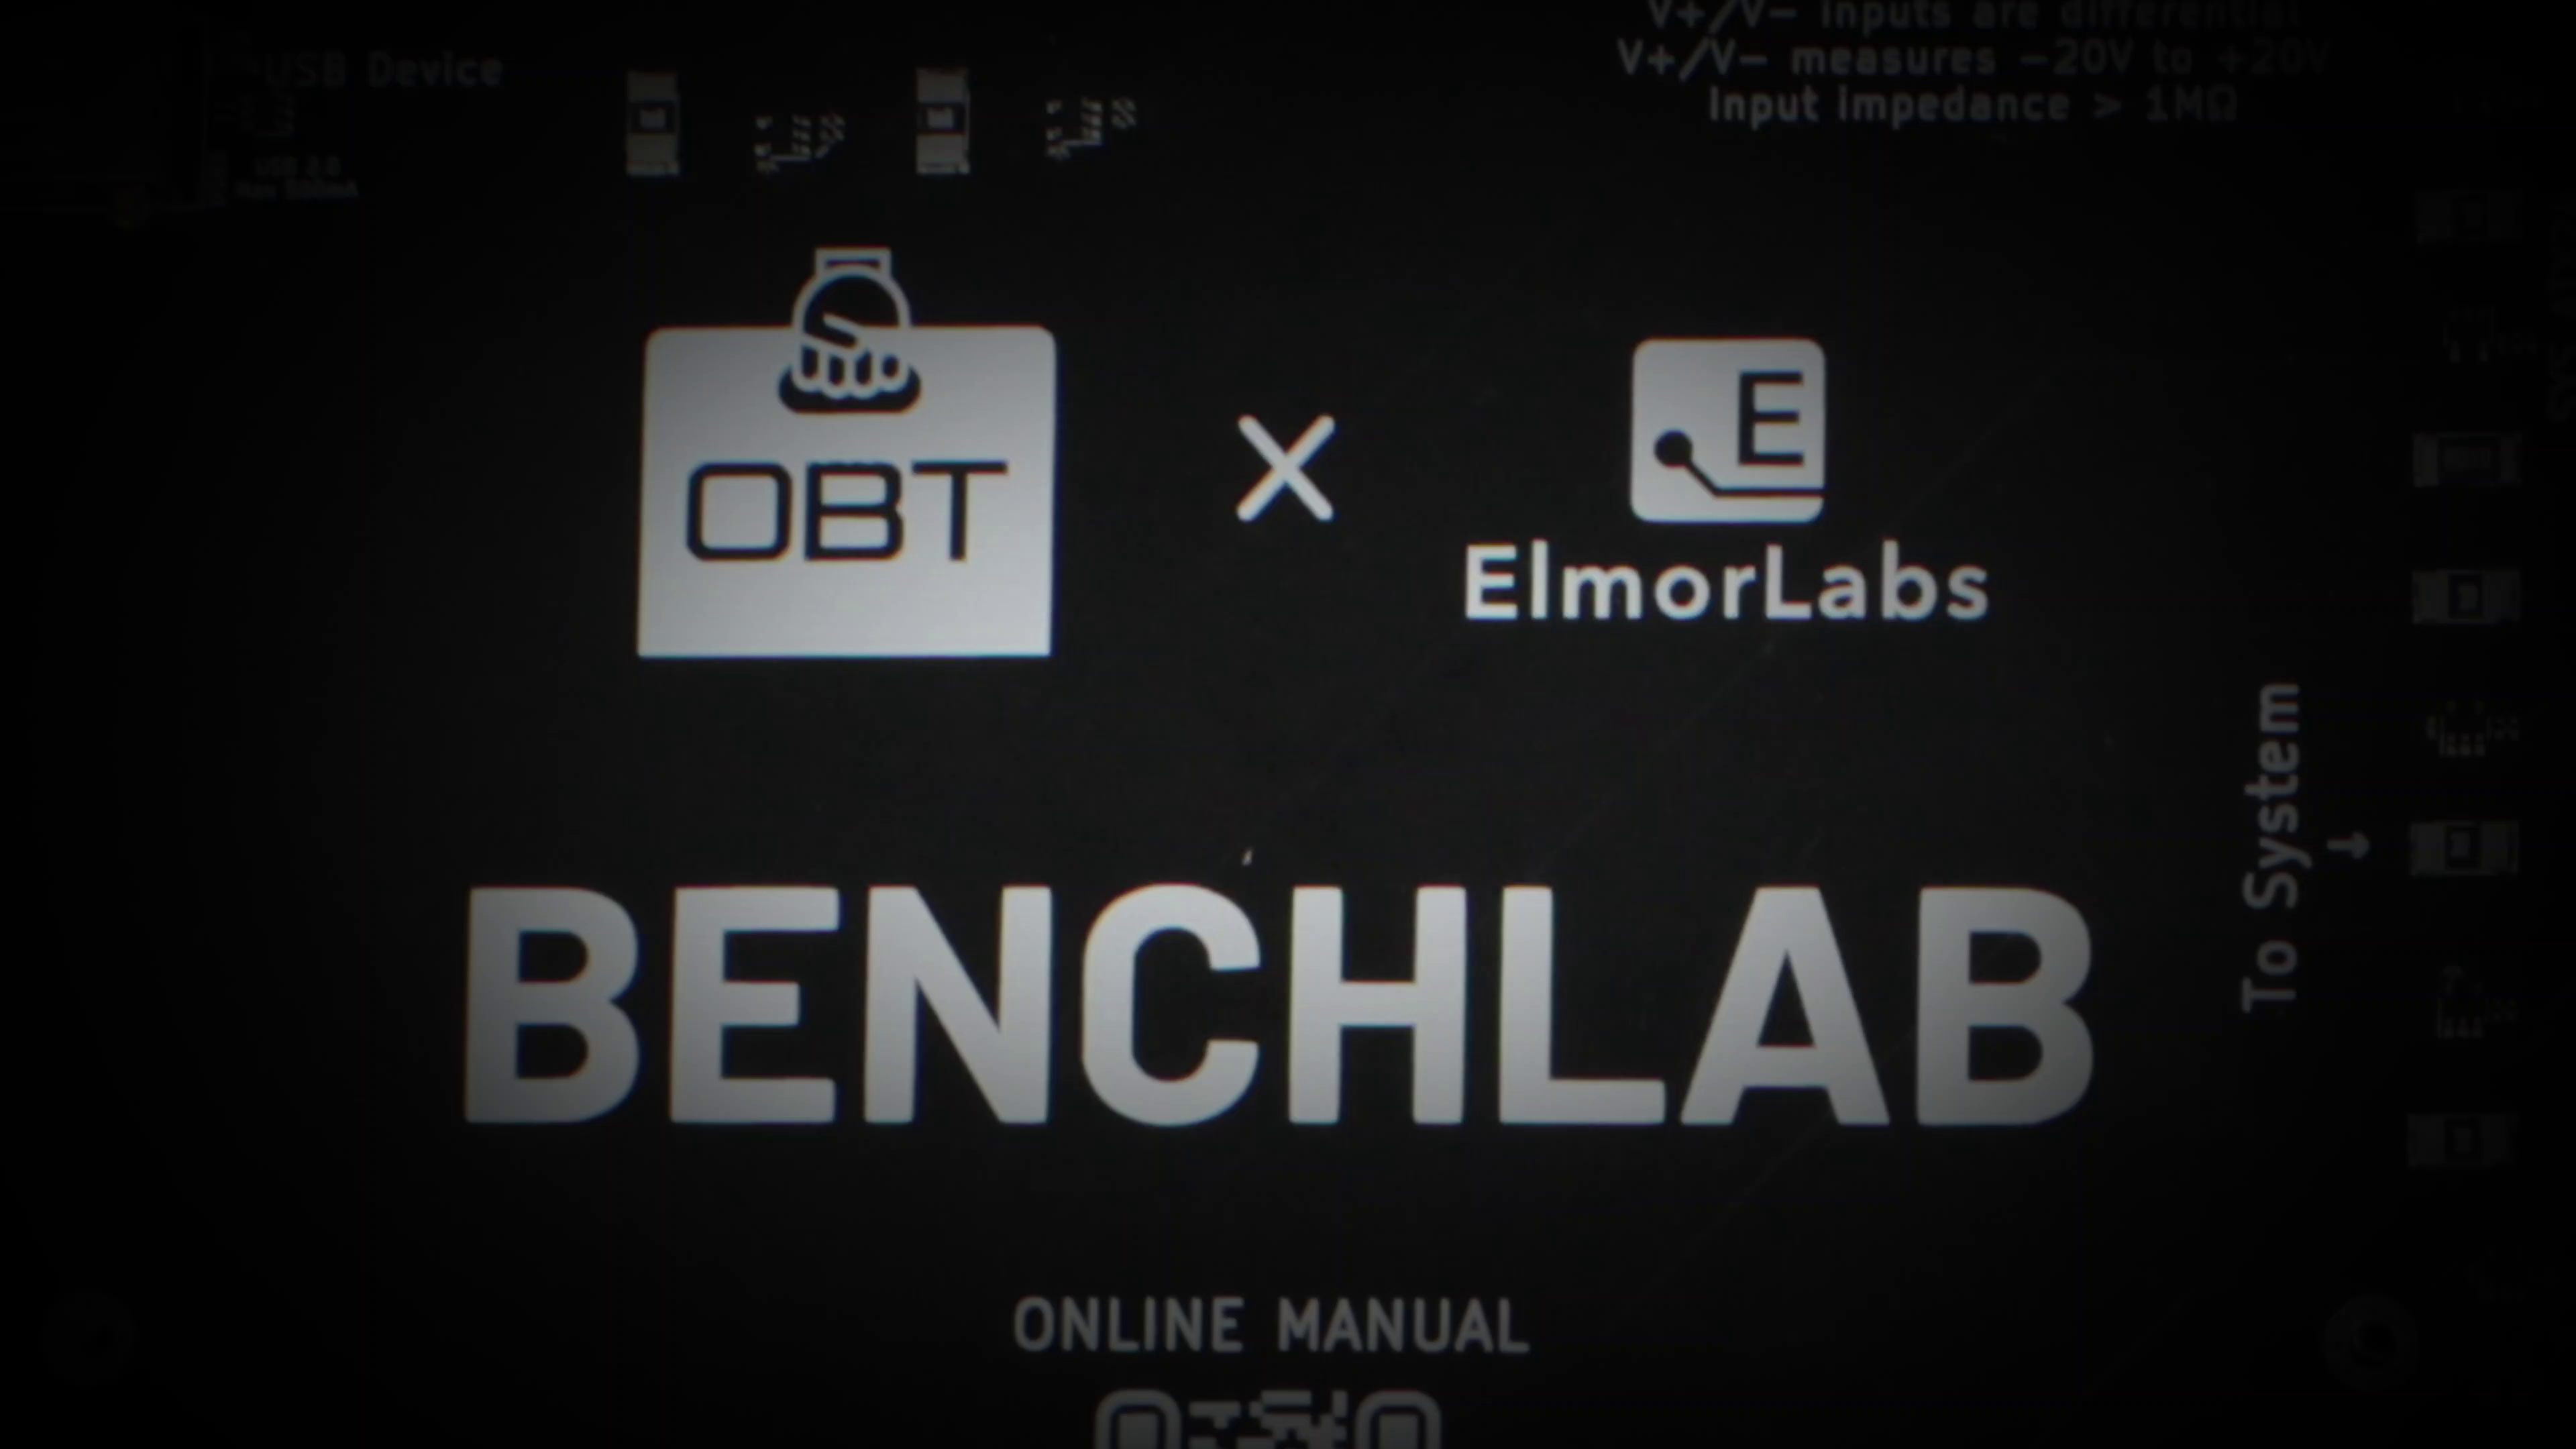 Load video: introducing benchlab teaser video